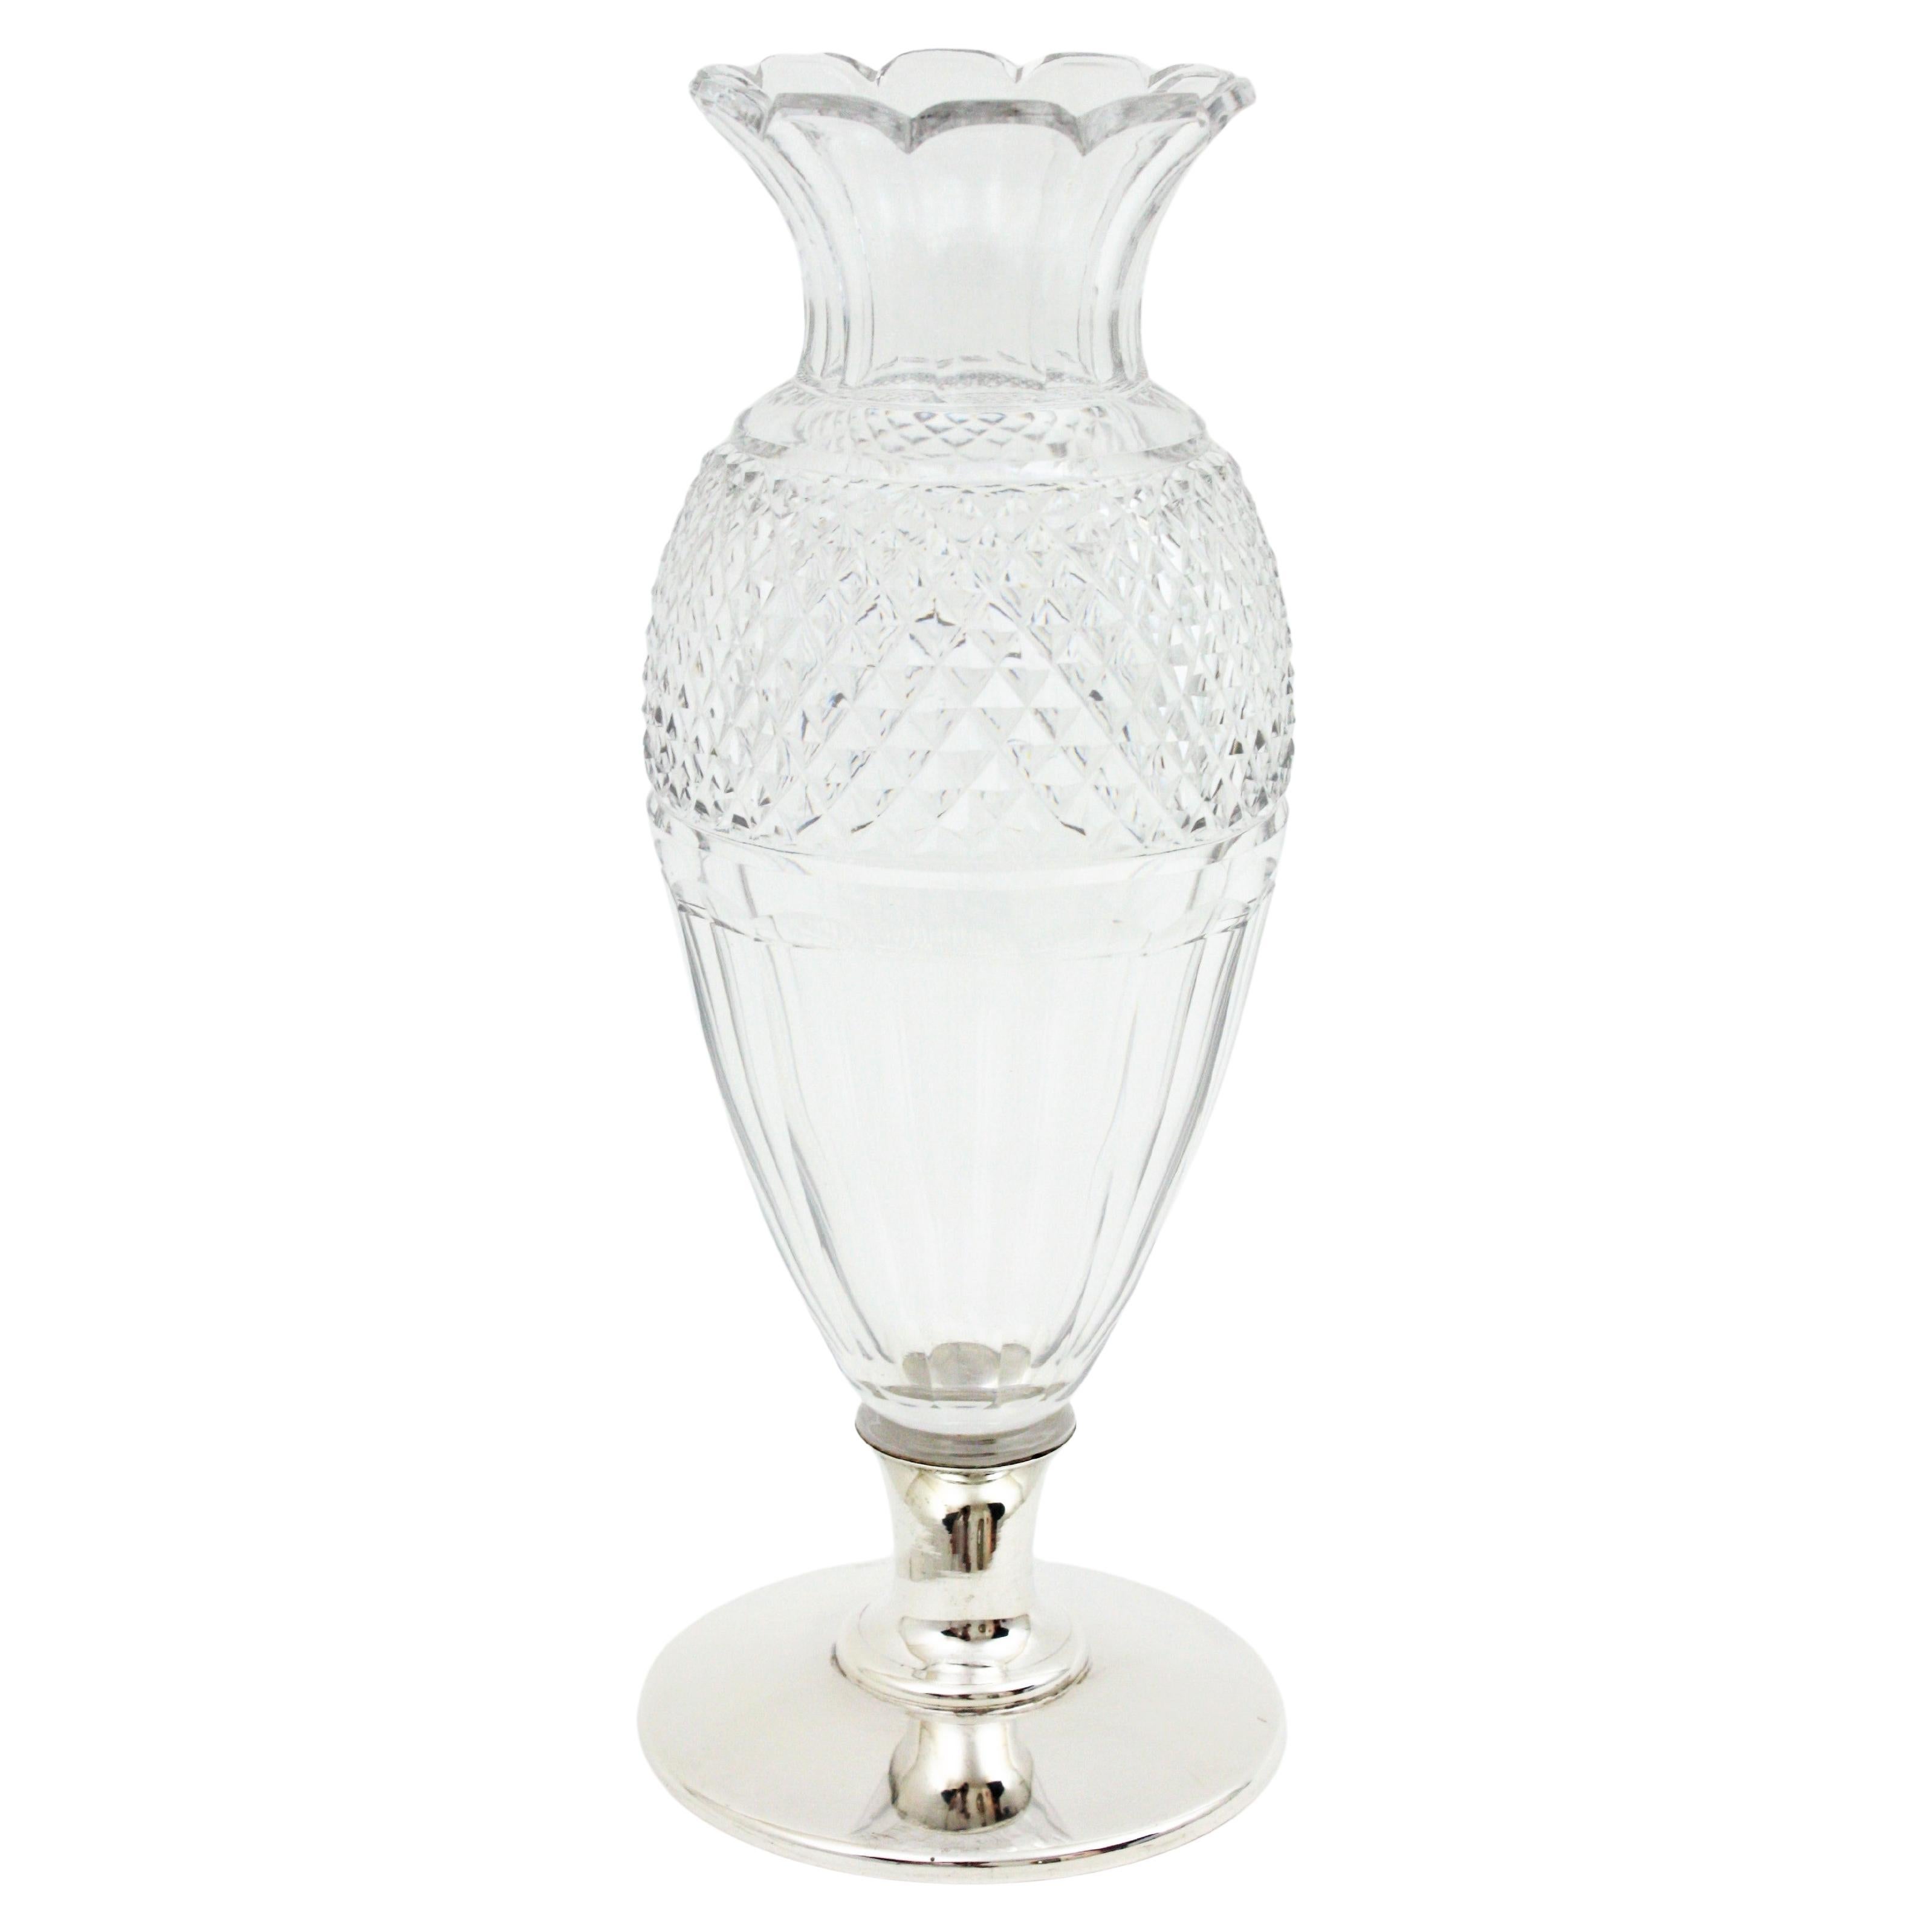 Spanish Art Deco Cut Crystal and Silver Urn Vase For Sale